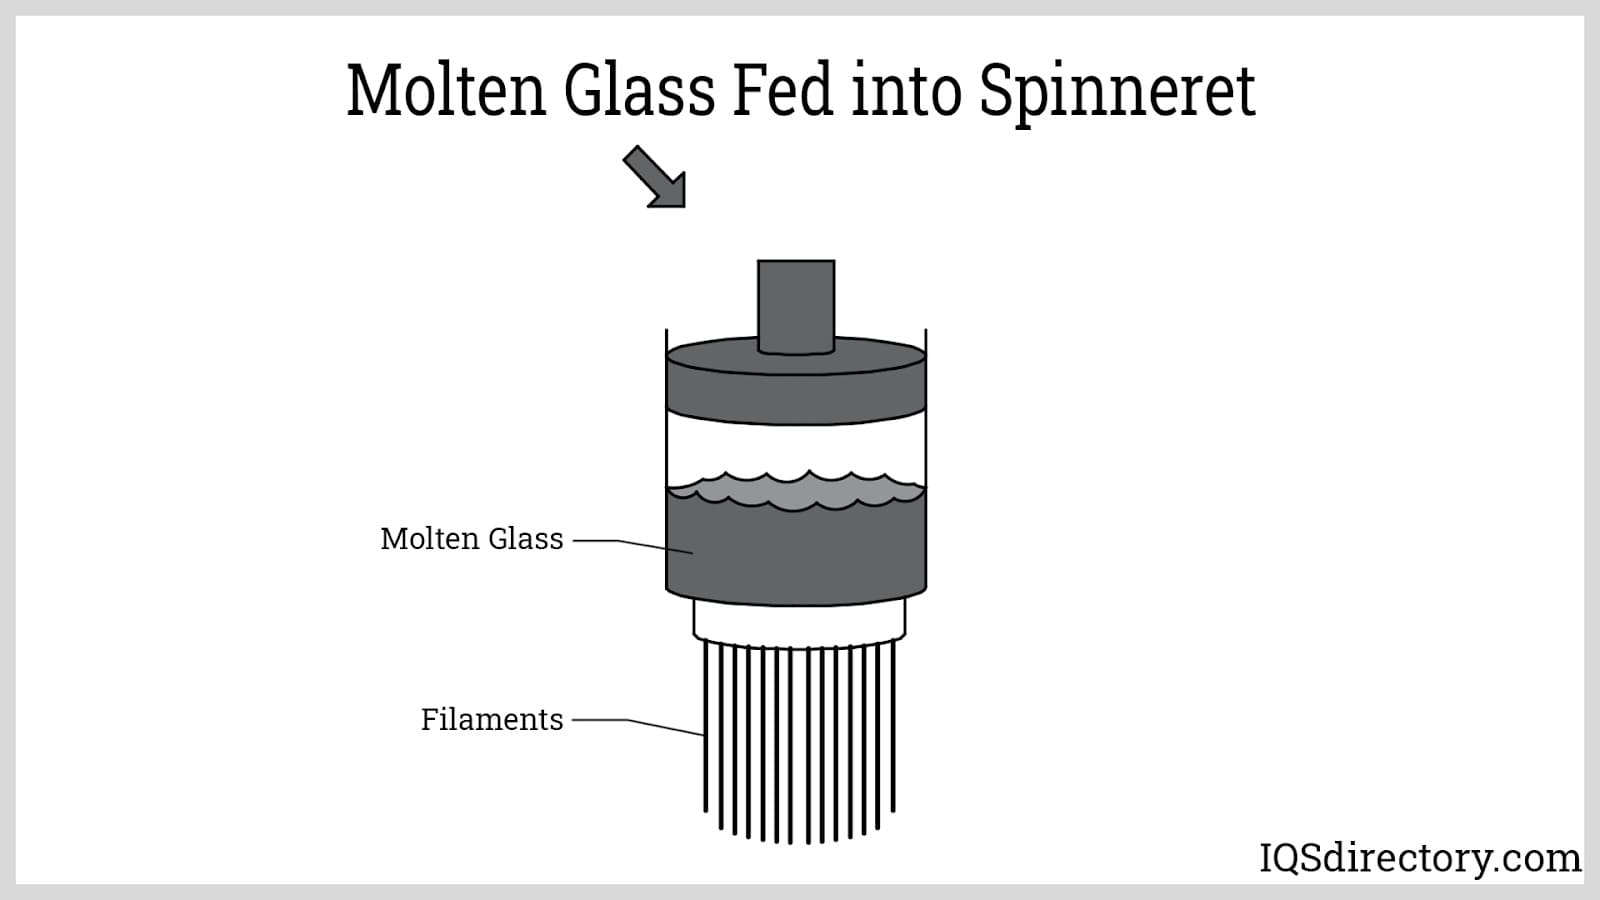 Molten Glass Fed into Spinneret